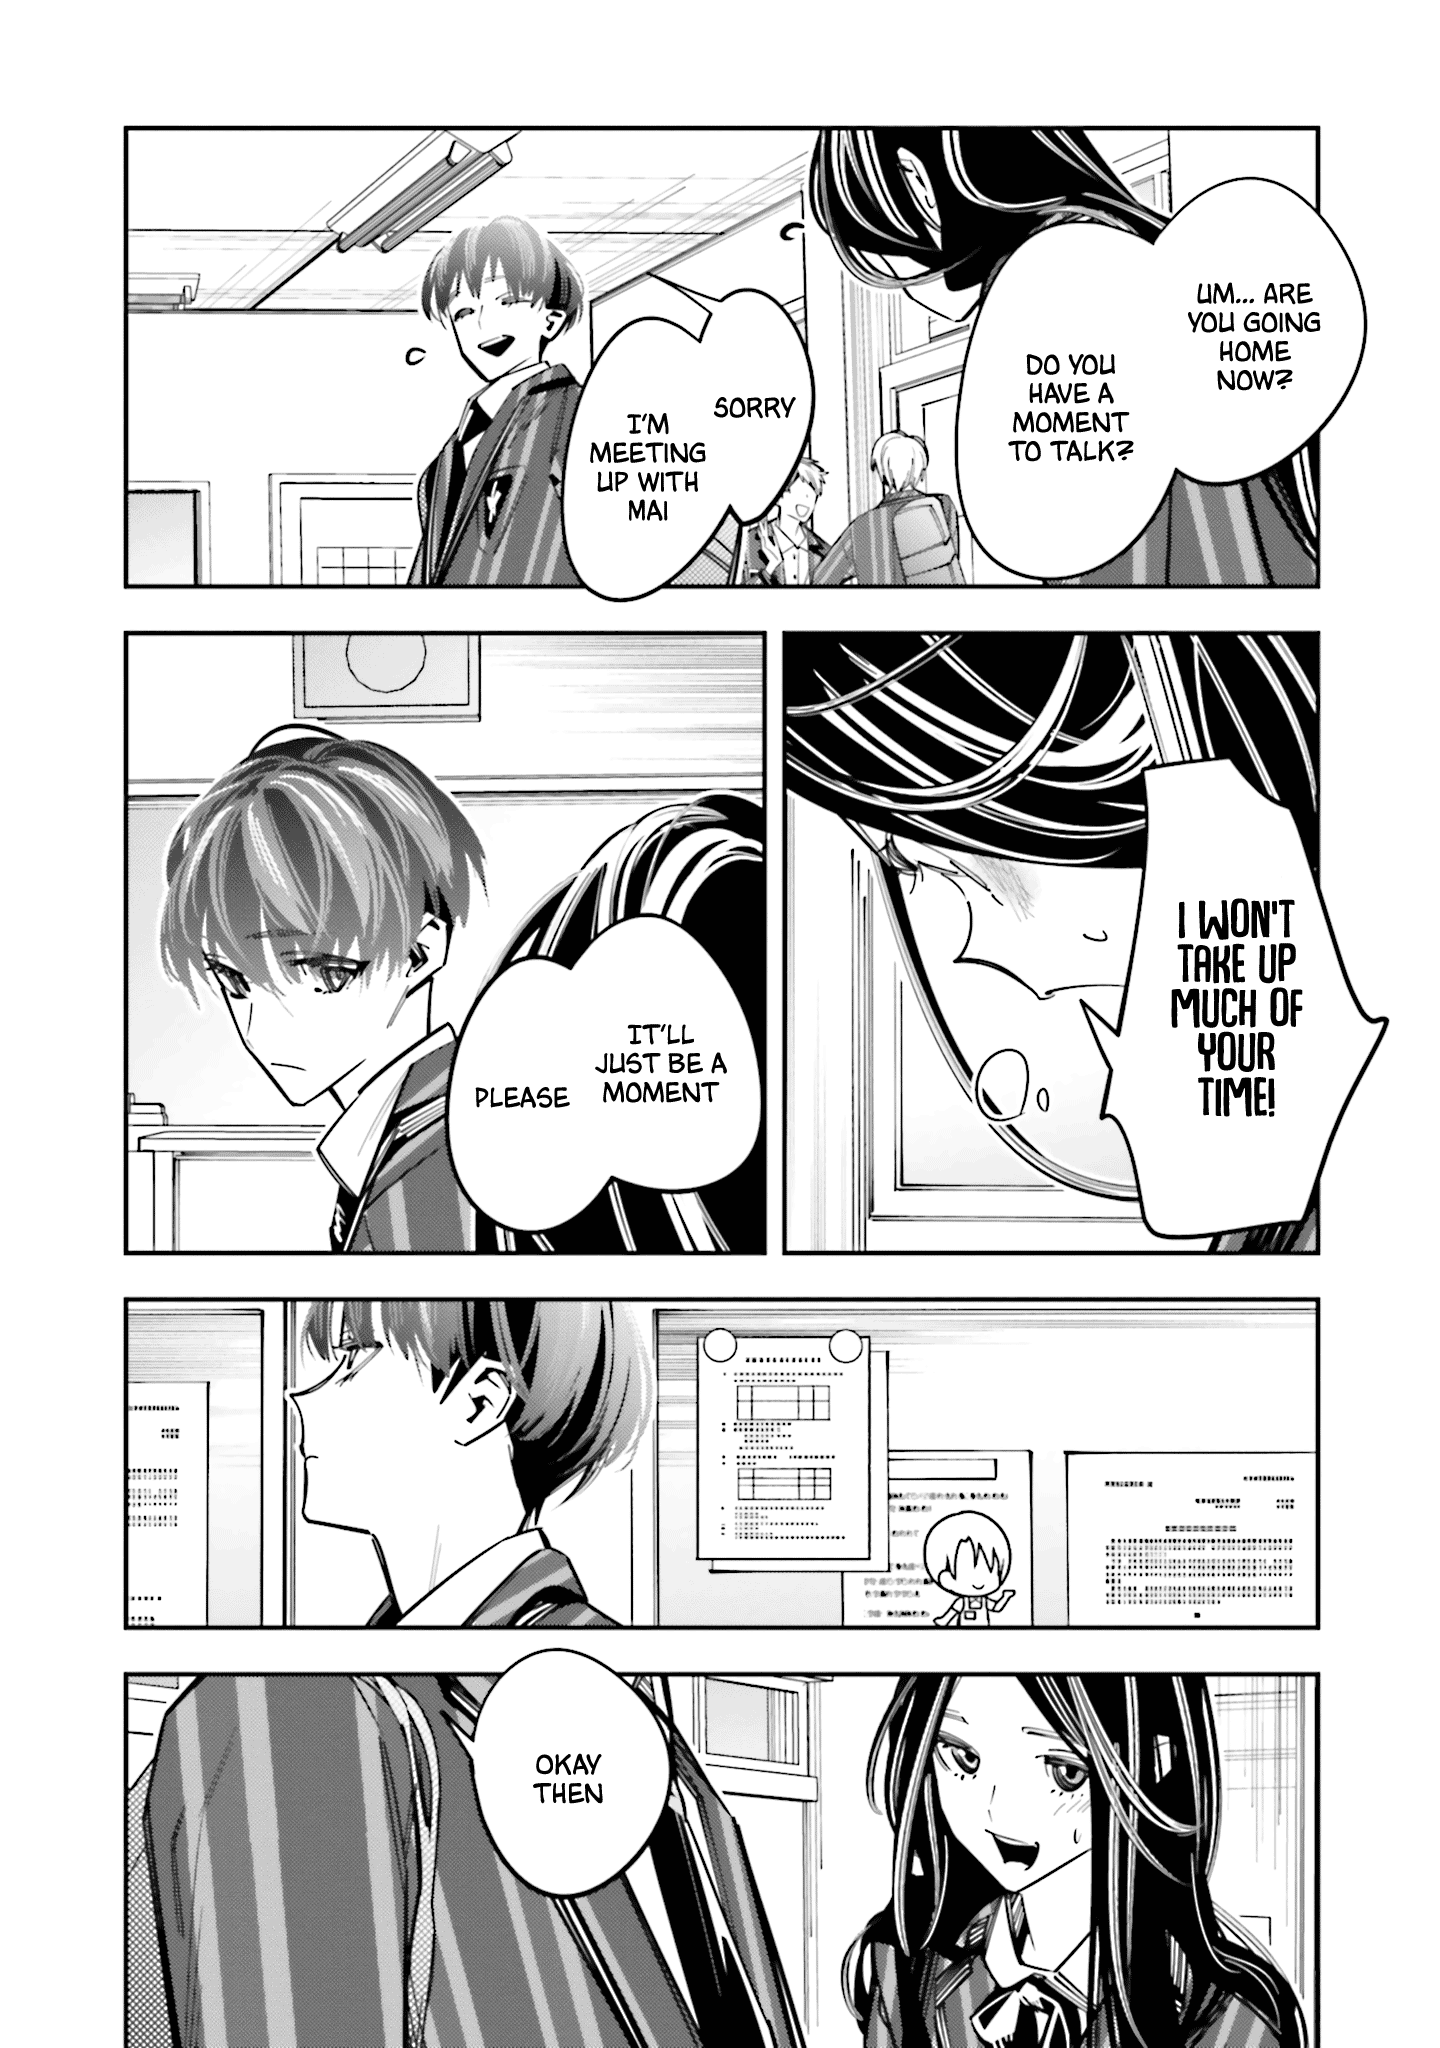 I Reincarnated As The Little Sister Of A Death Game Manga's Murder Mastermind And Failed Chapter 10 #18